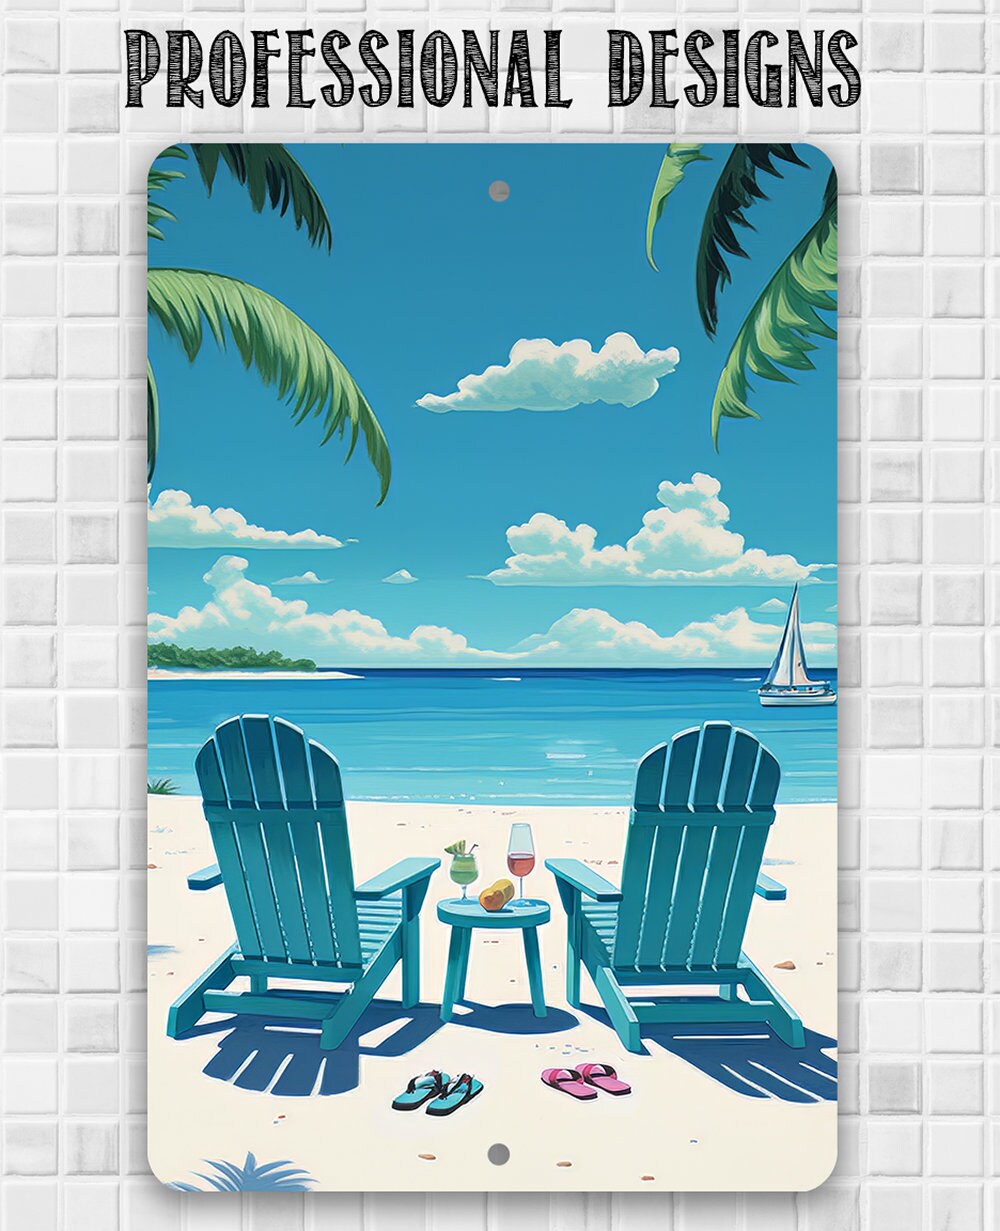 Tin - Another Day in Paradise - Great Beach and Nautical Decor - Durable Metal Sign - 8" x 12" or 12" x 18" Use Indoor/Outdoor - Gift